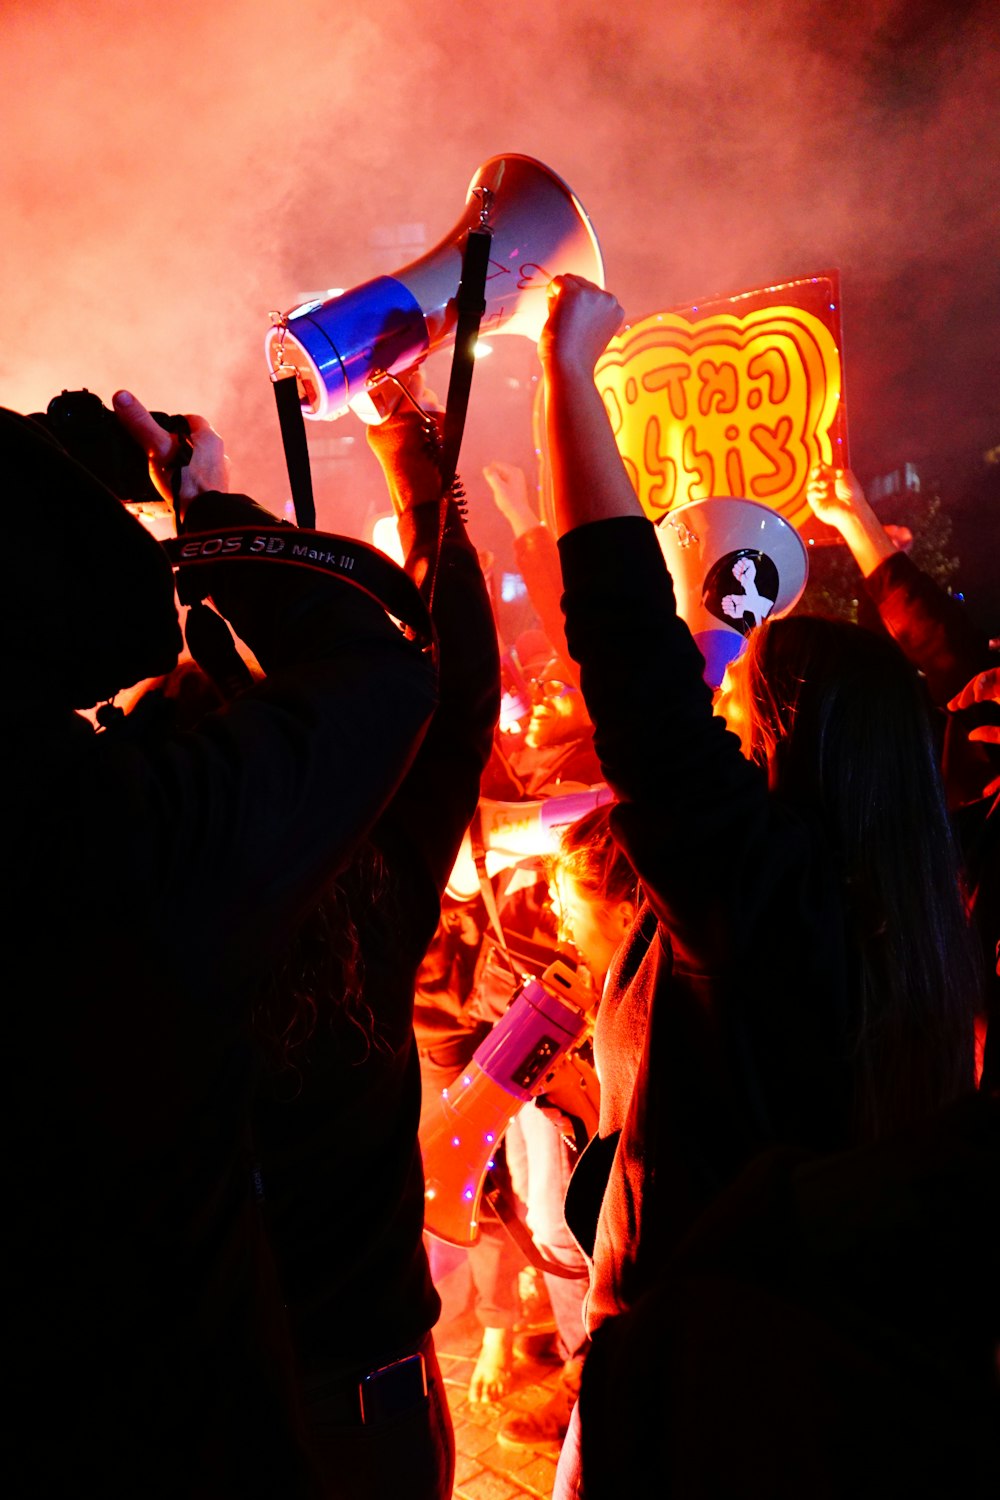 people raising hands with blue and red neon light signage